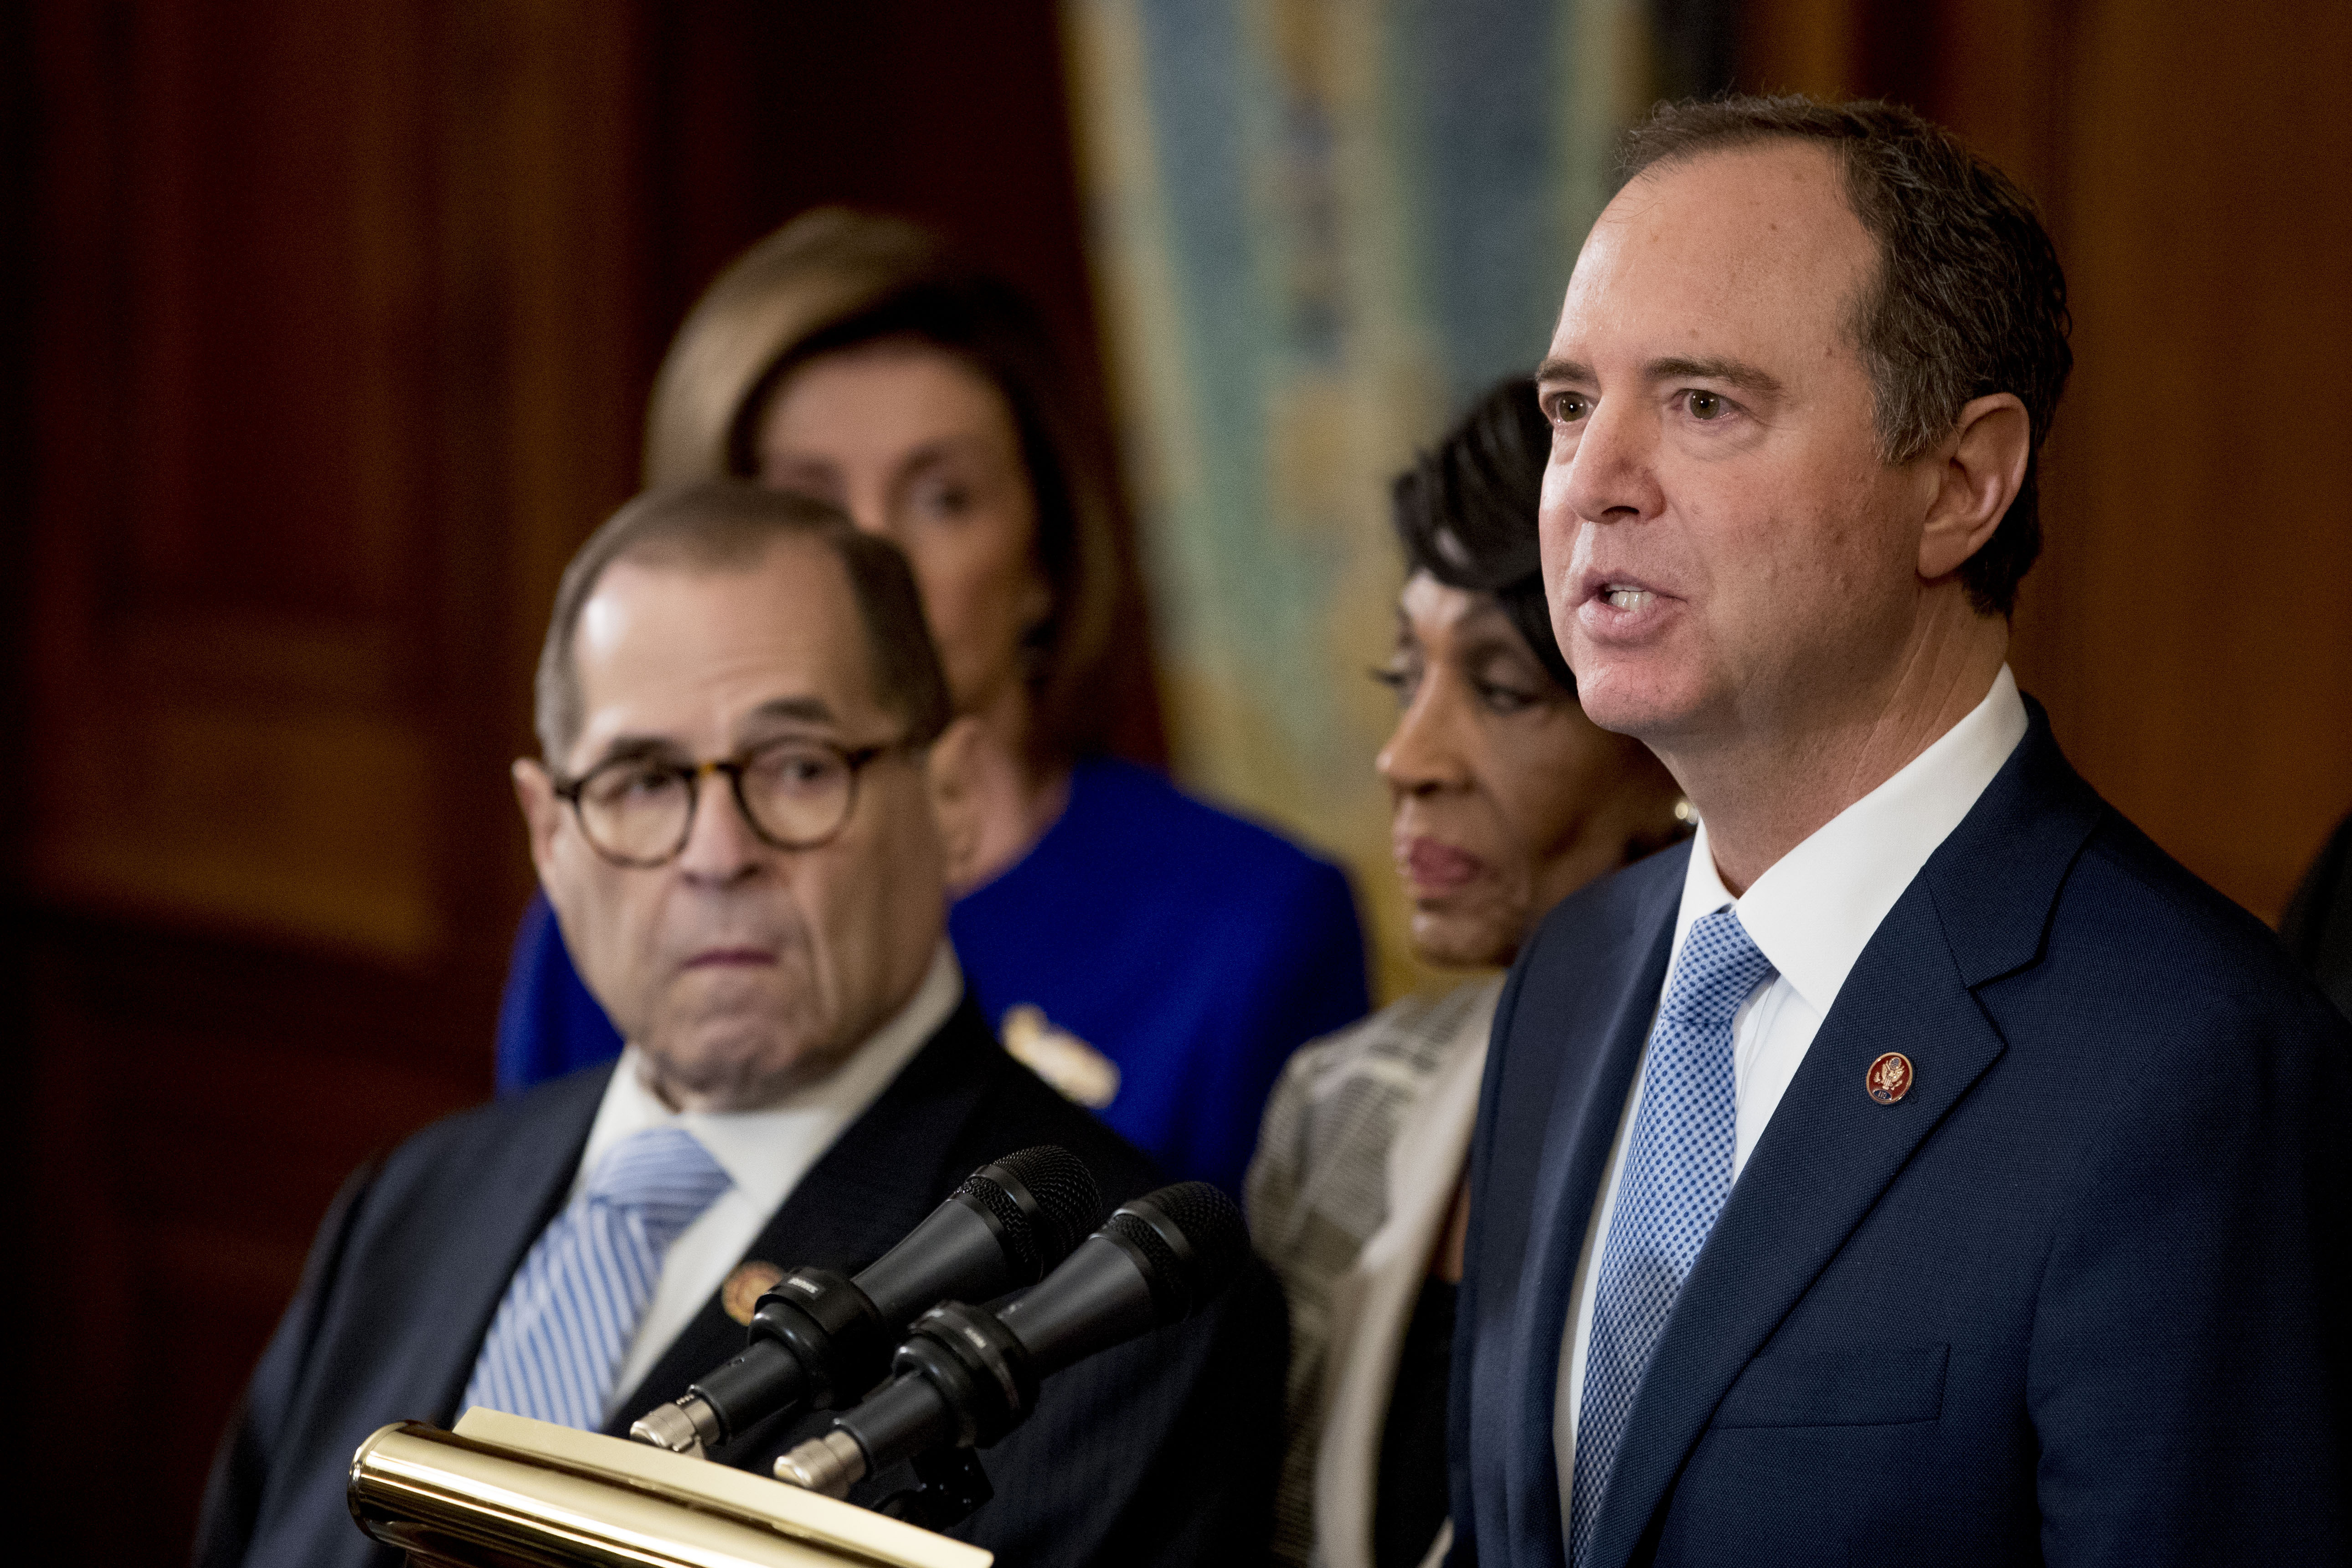 Rep. Adam Schiff, D-Calif., Chairman of the House Intelligence Committee, right, speaks with from left Chairman of the House Judiciary Committee Jerrold Nadler, D-N.Y., House Speaker Nancy Pelosi and Chairwoman of the House Financial Services Committee Maxine Waters, D-Calif., second from right, during a news conference to unveil articles of impeachment against President Donald Trump, abuse of power and obstruction of Congress, on Tuesday.